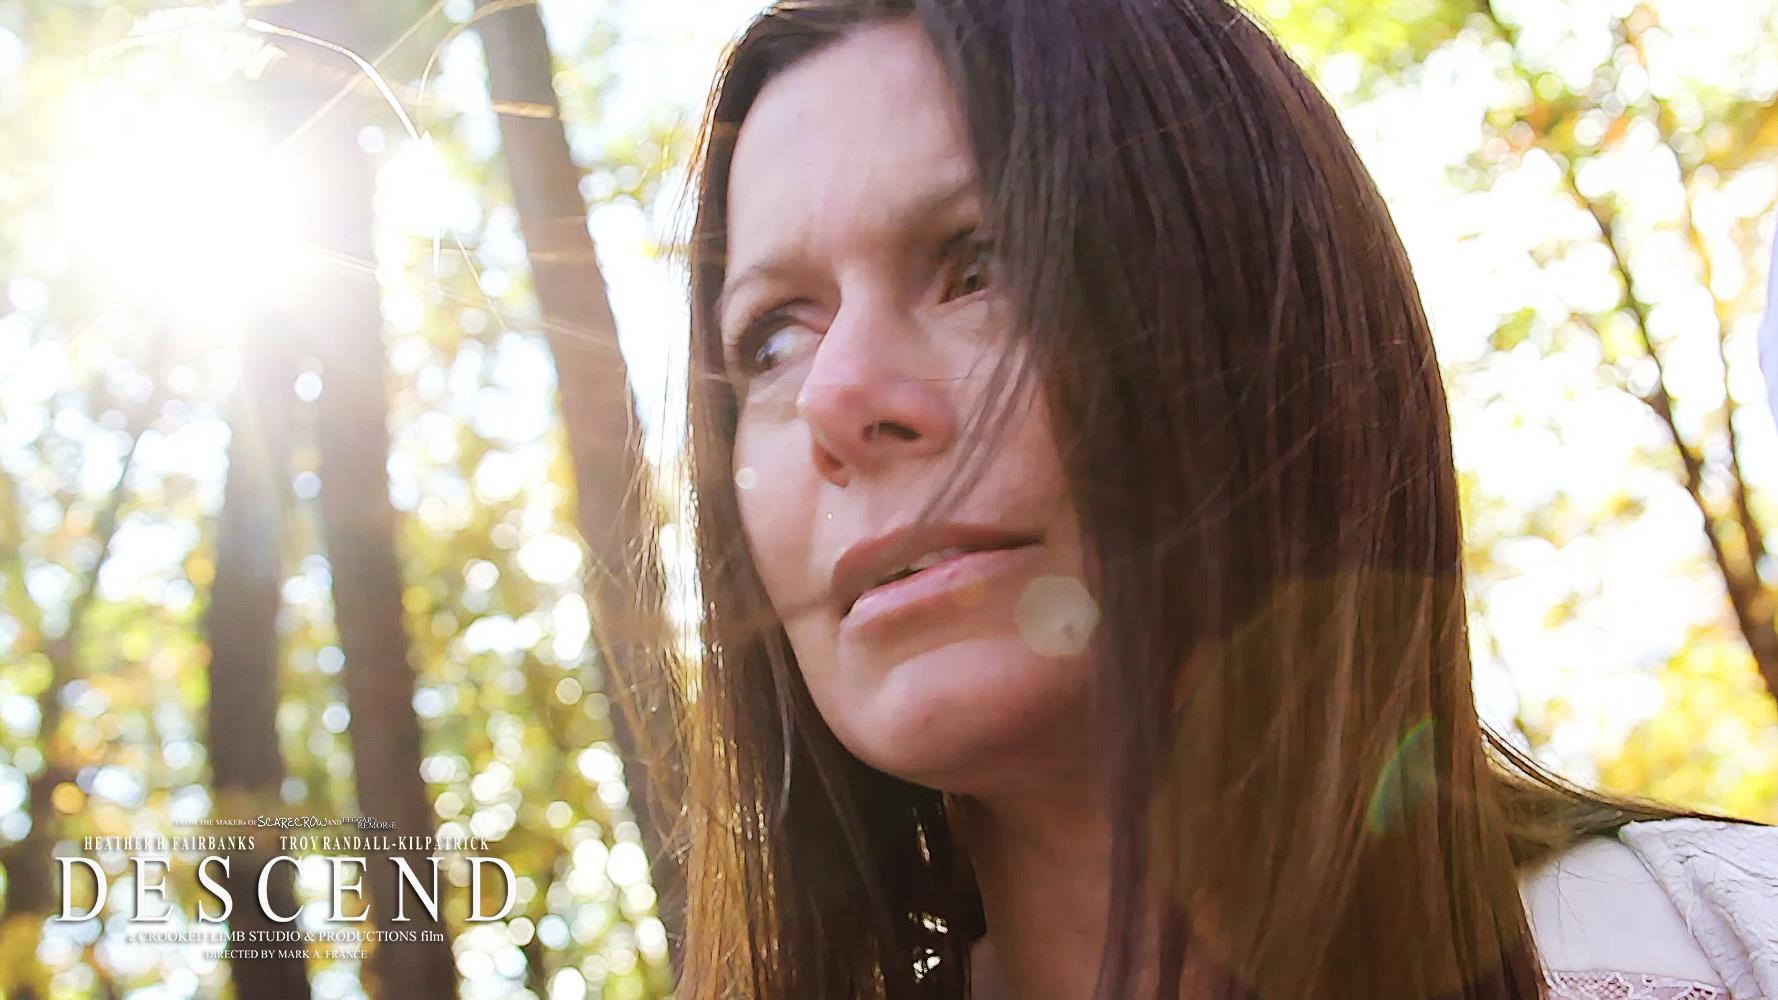 Lead 'Andrea Townsend' in Crooked Limb Studio & Productions' 'Descend' Directed by Mark France